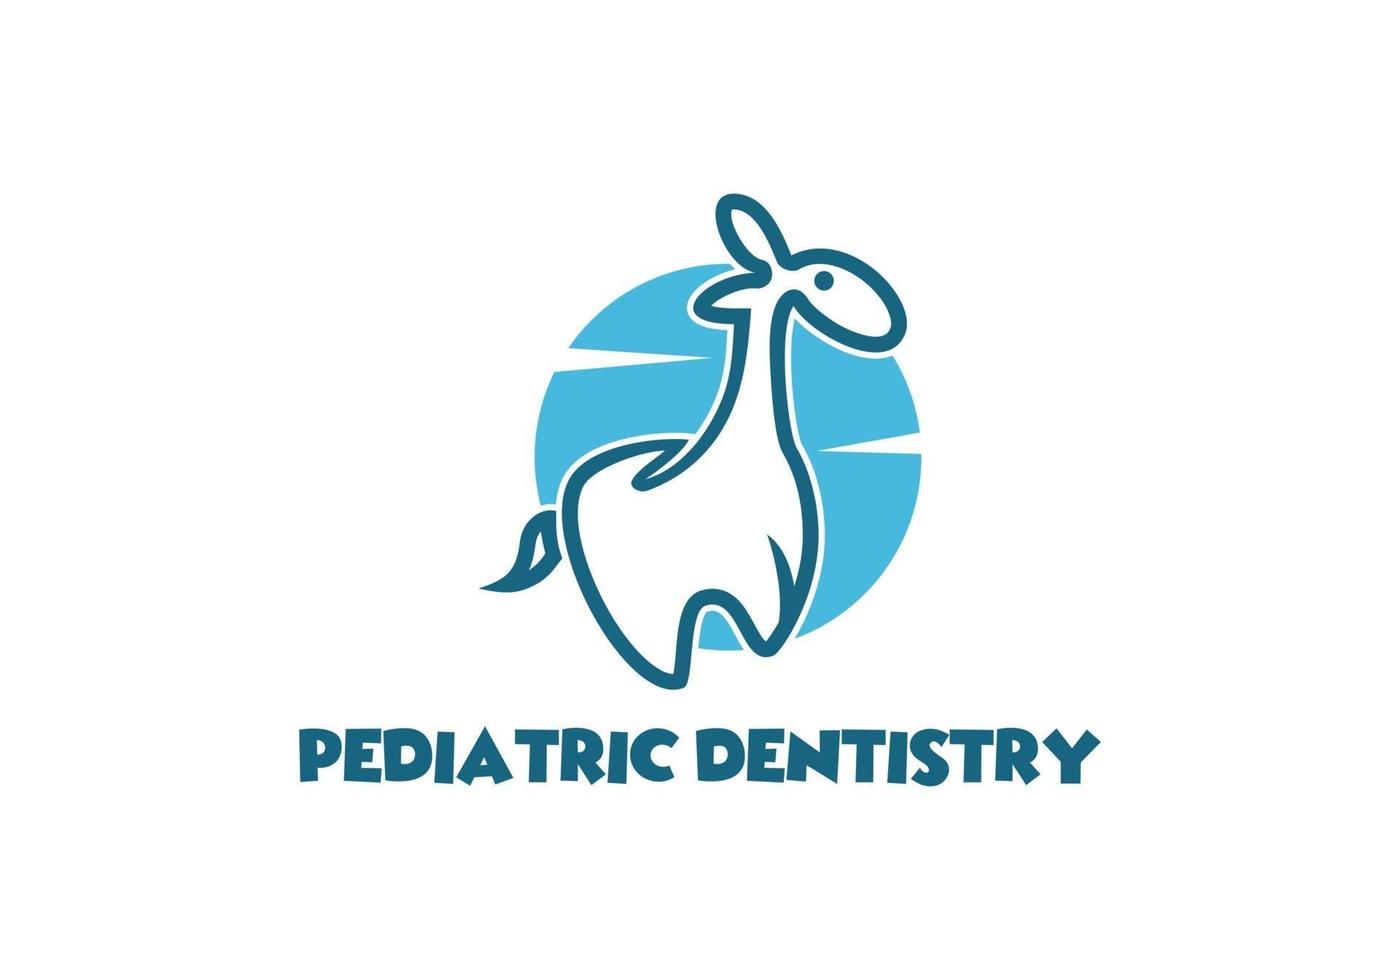 Funny pedriatic dentistry with giraffe and tooth logo design vector